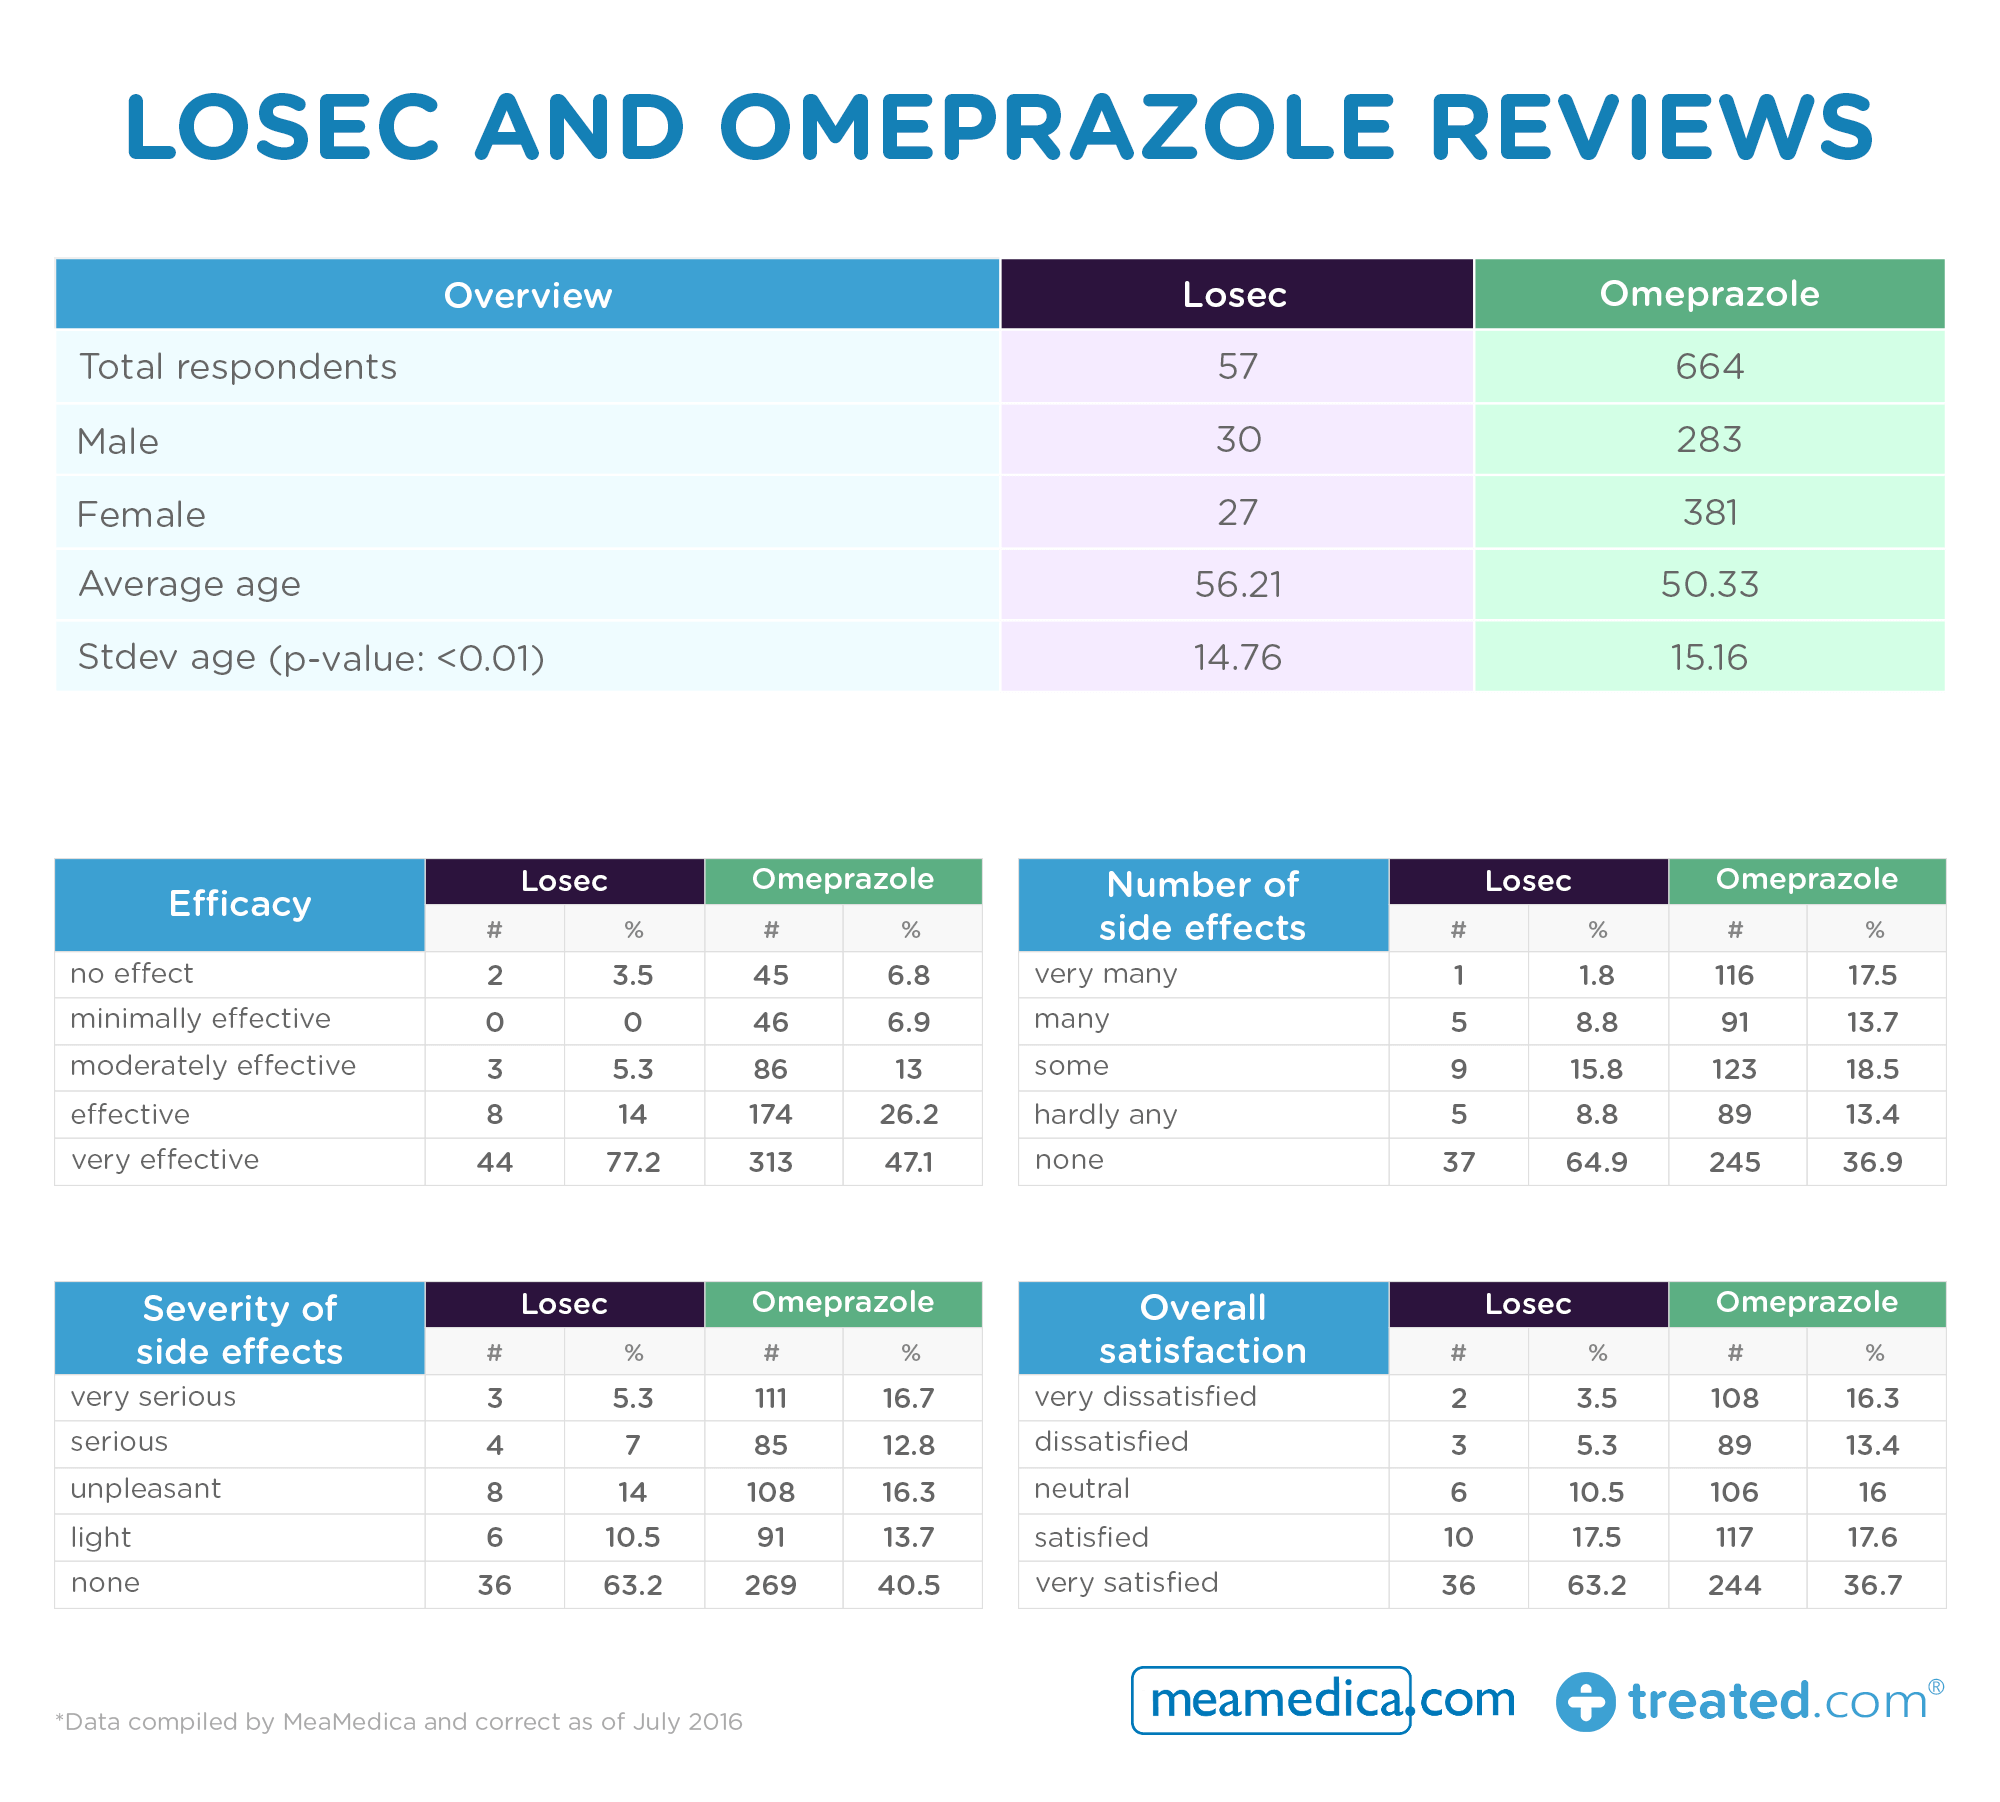 Losec and Omeprazole reviews table